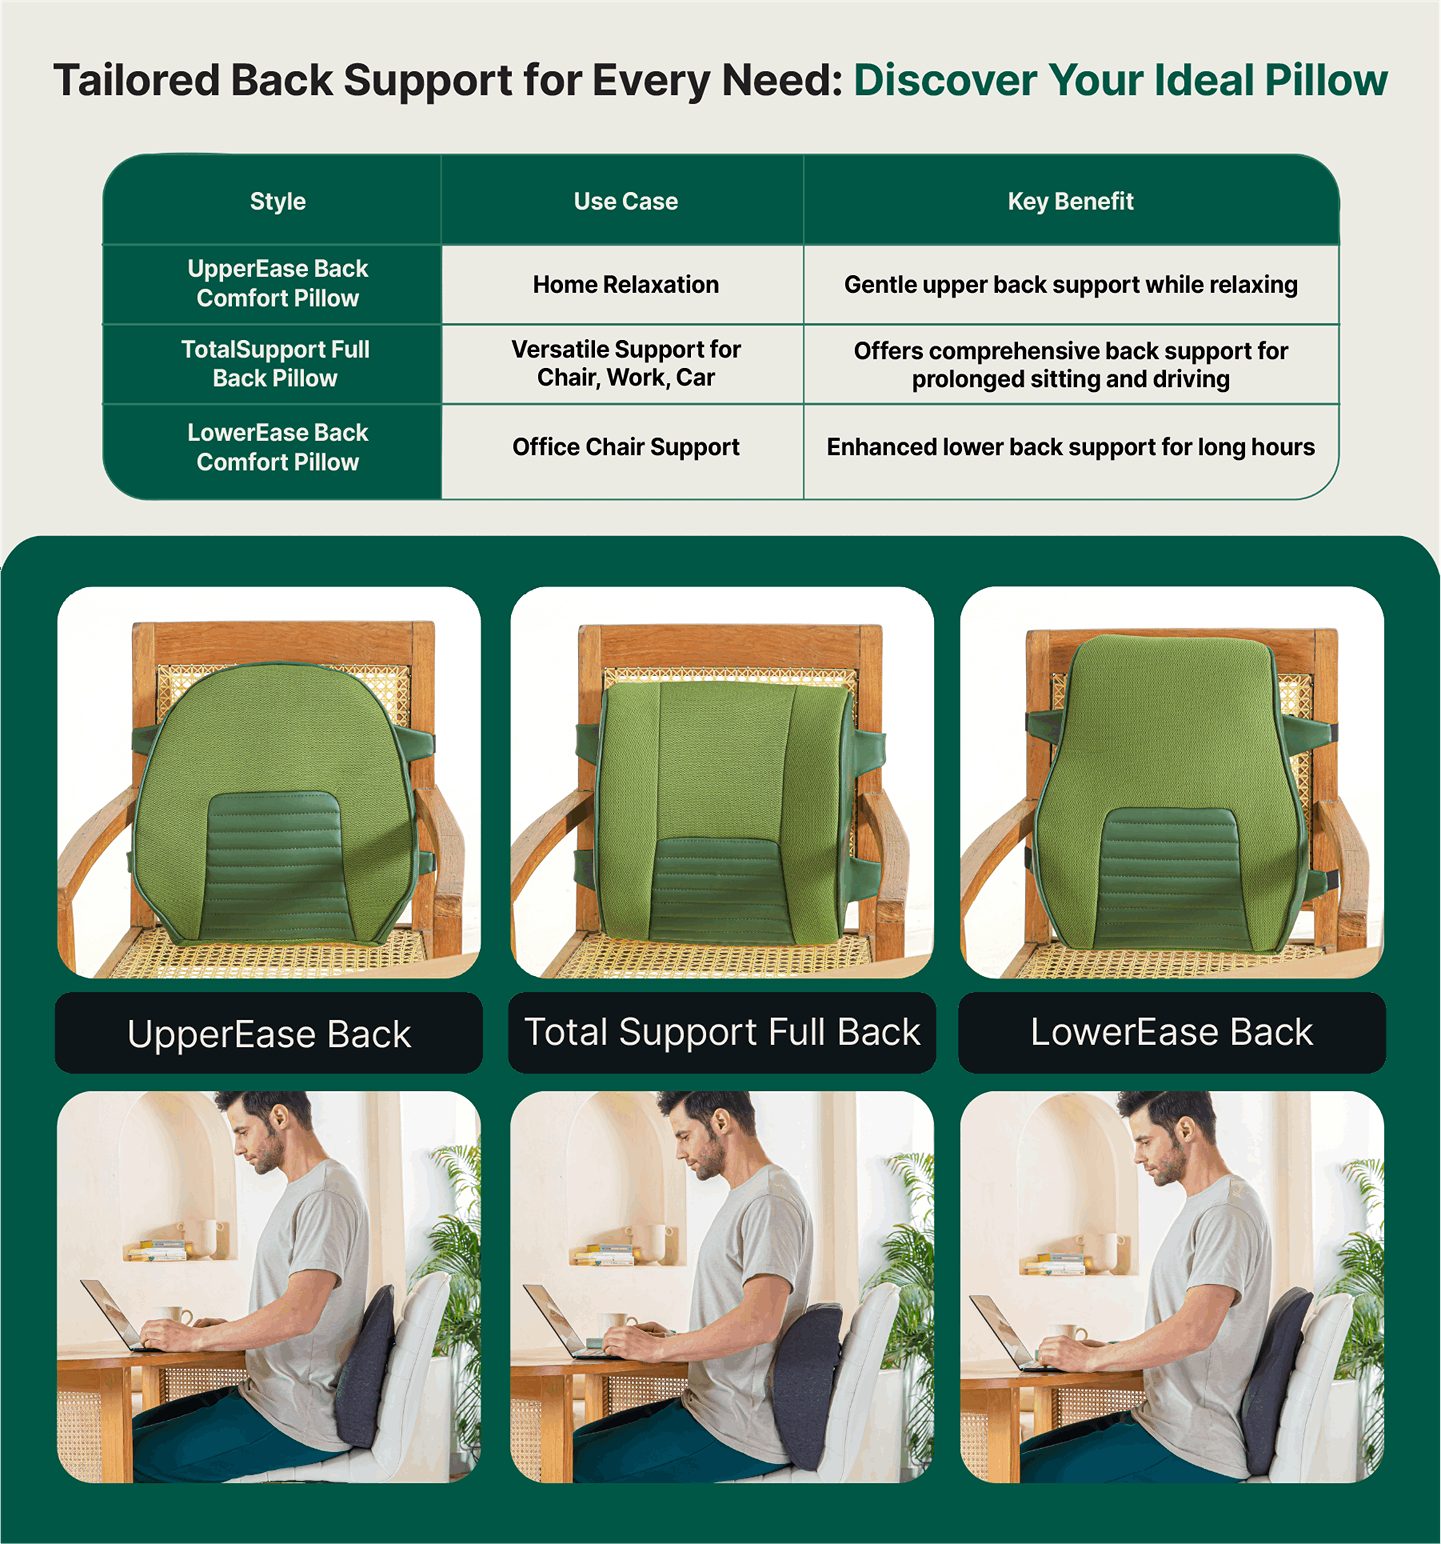 LowerEase Back Support Pillow